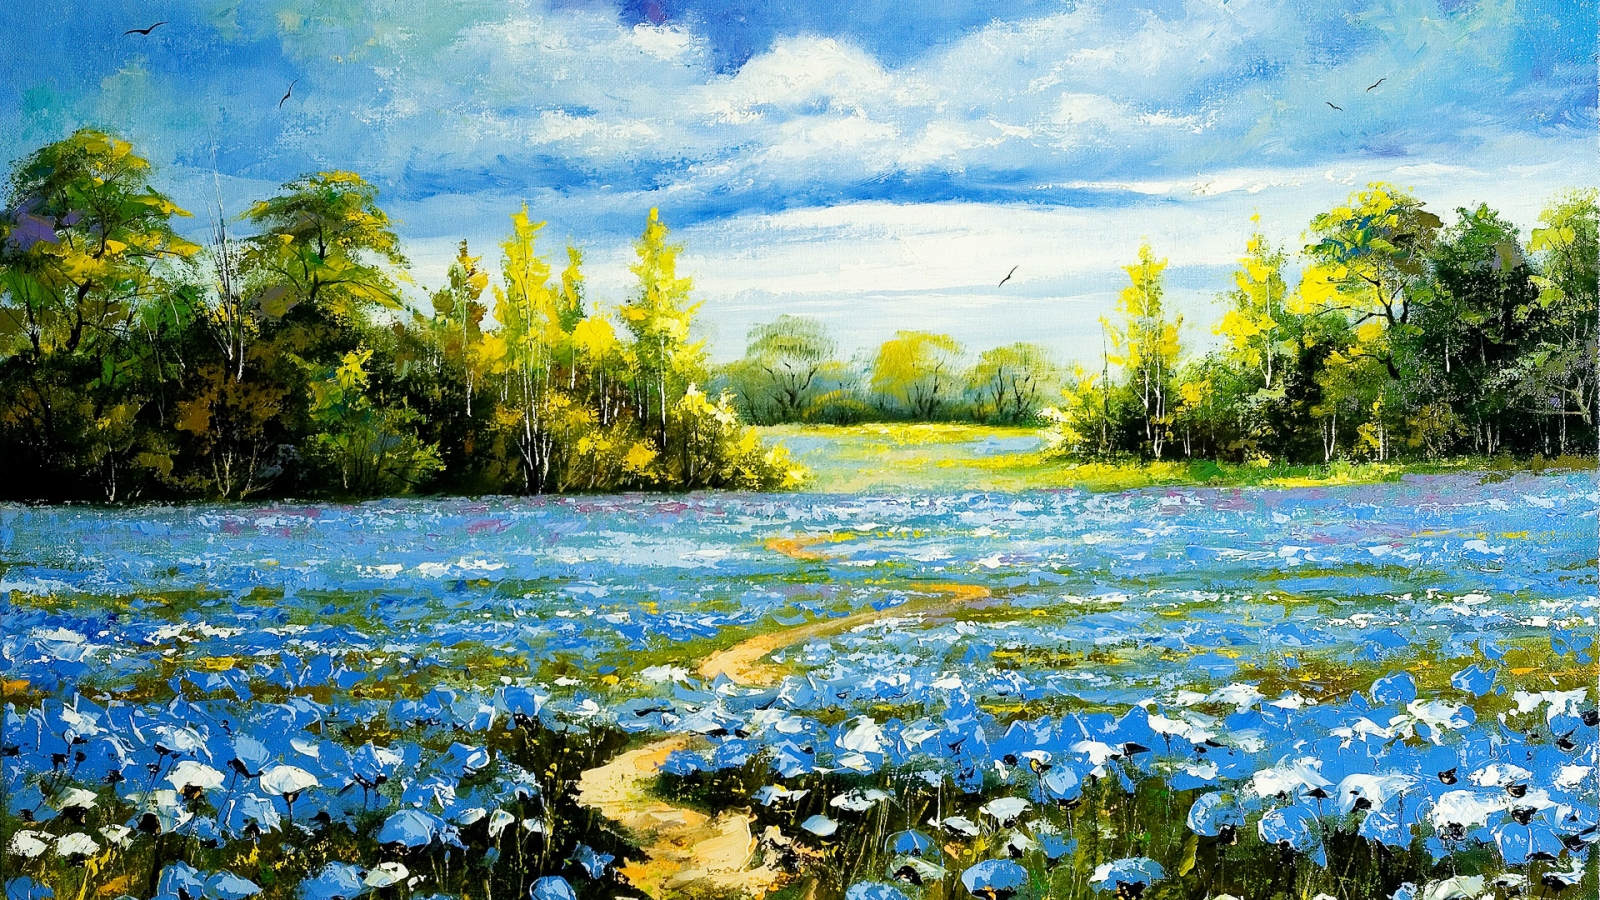 Landscape Oil Painting for 1600 x 900 HDTV resolution